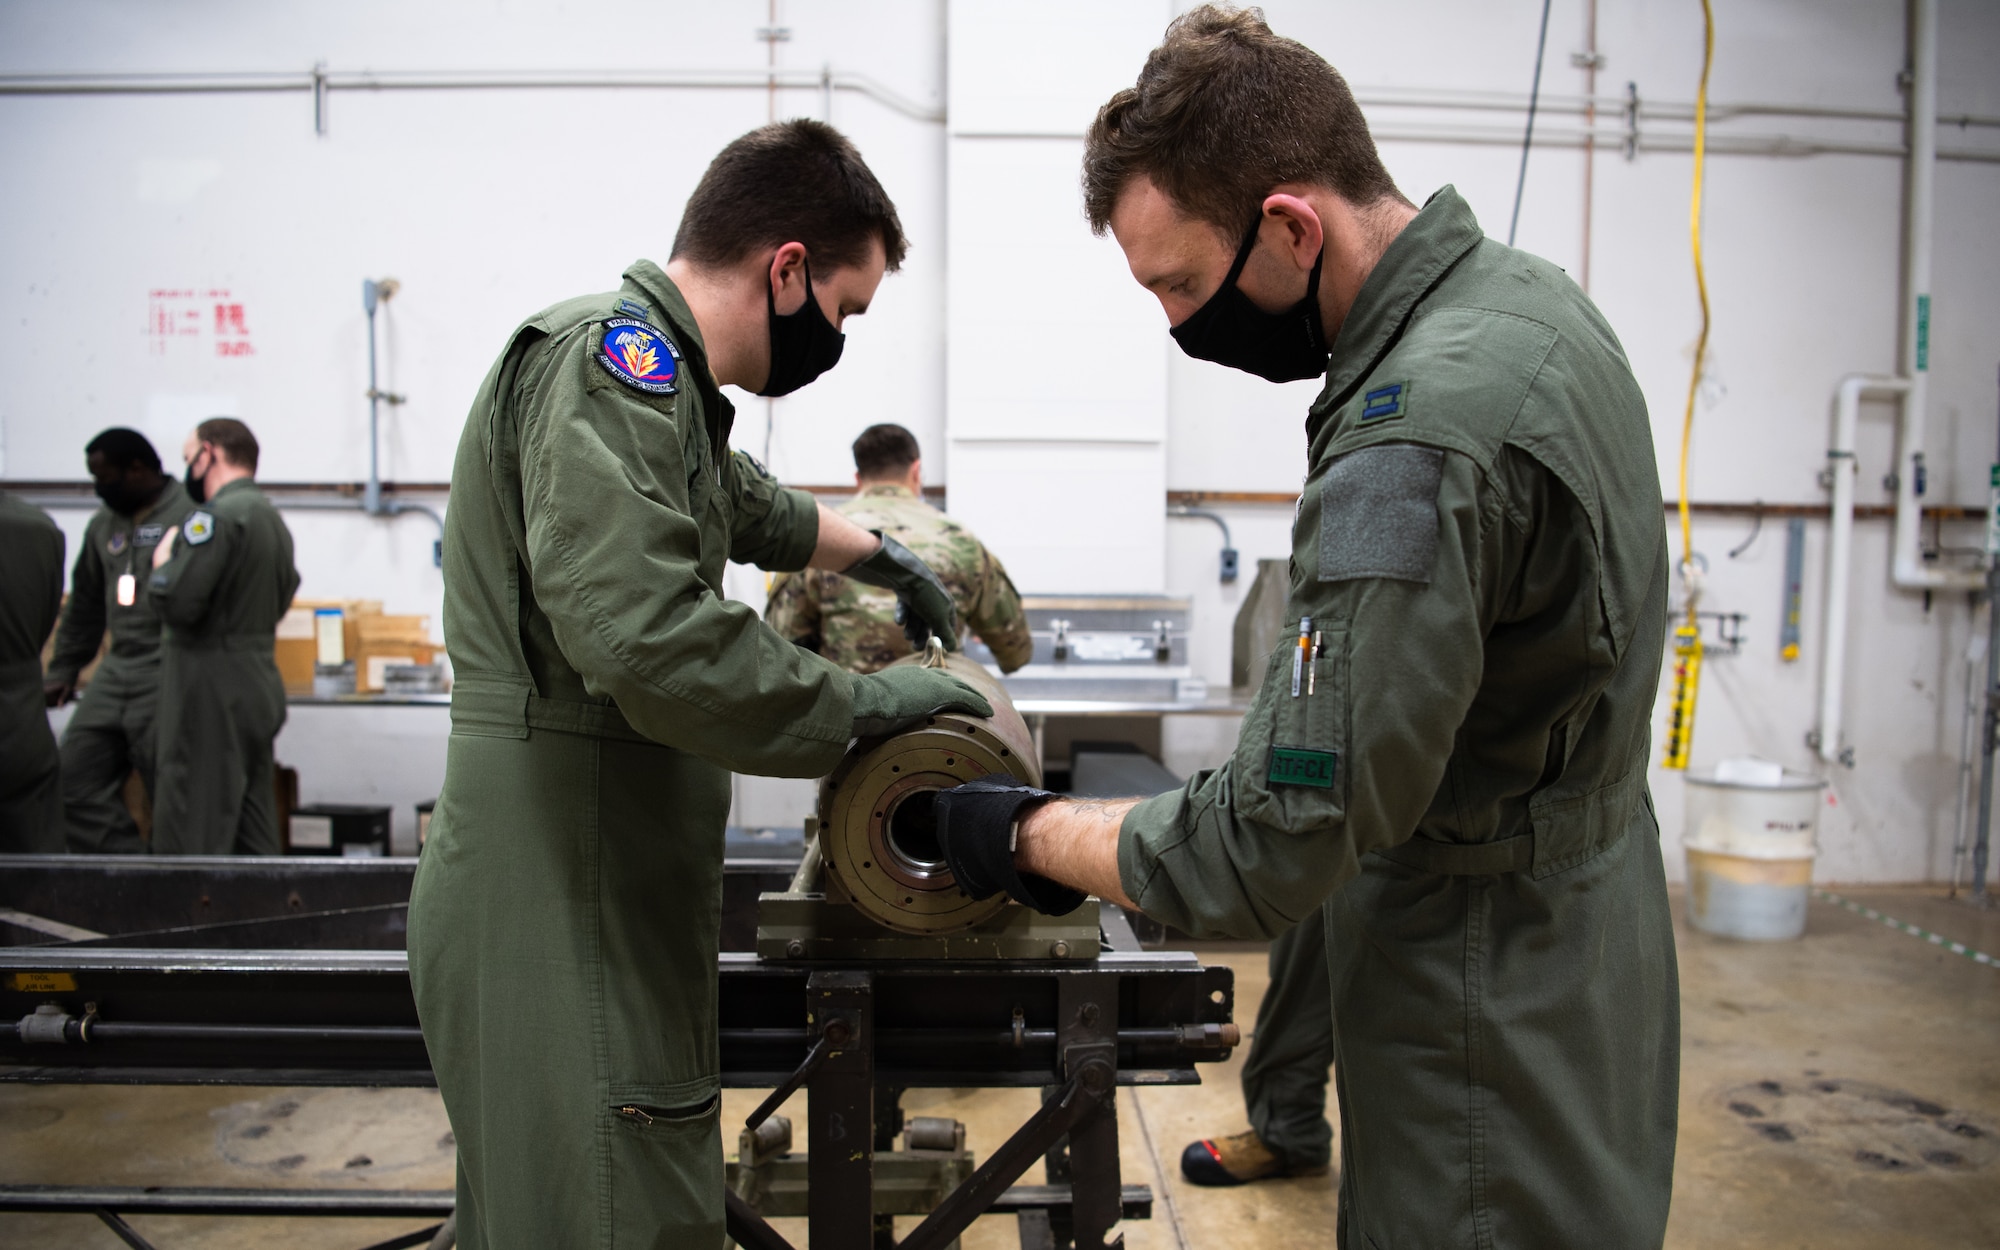 Capts. Samuel Shrewsberry and Michael McBrien, 340th Weapons Squadron weapons instructor course students, inspect training munitions during a training bomb build at Barksdale Air Force Base, Louisiana, April 13, 2021. The Airmen from the 340th WPS trained with the 2nd Munitions Squadron to better learn and understand what it takes to build munitions. (U.S. Air Force photo by Airman 1st Class Jacob B. Wrightsman)